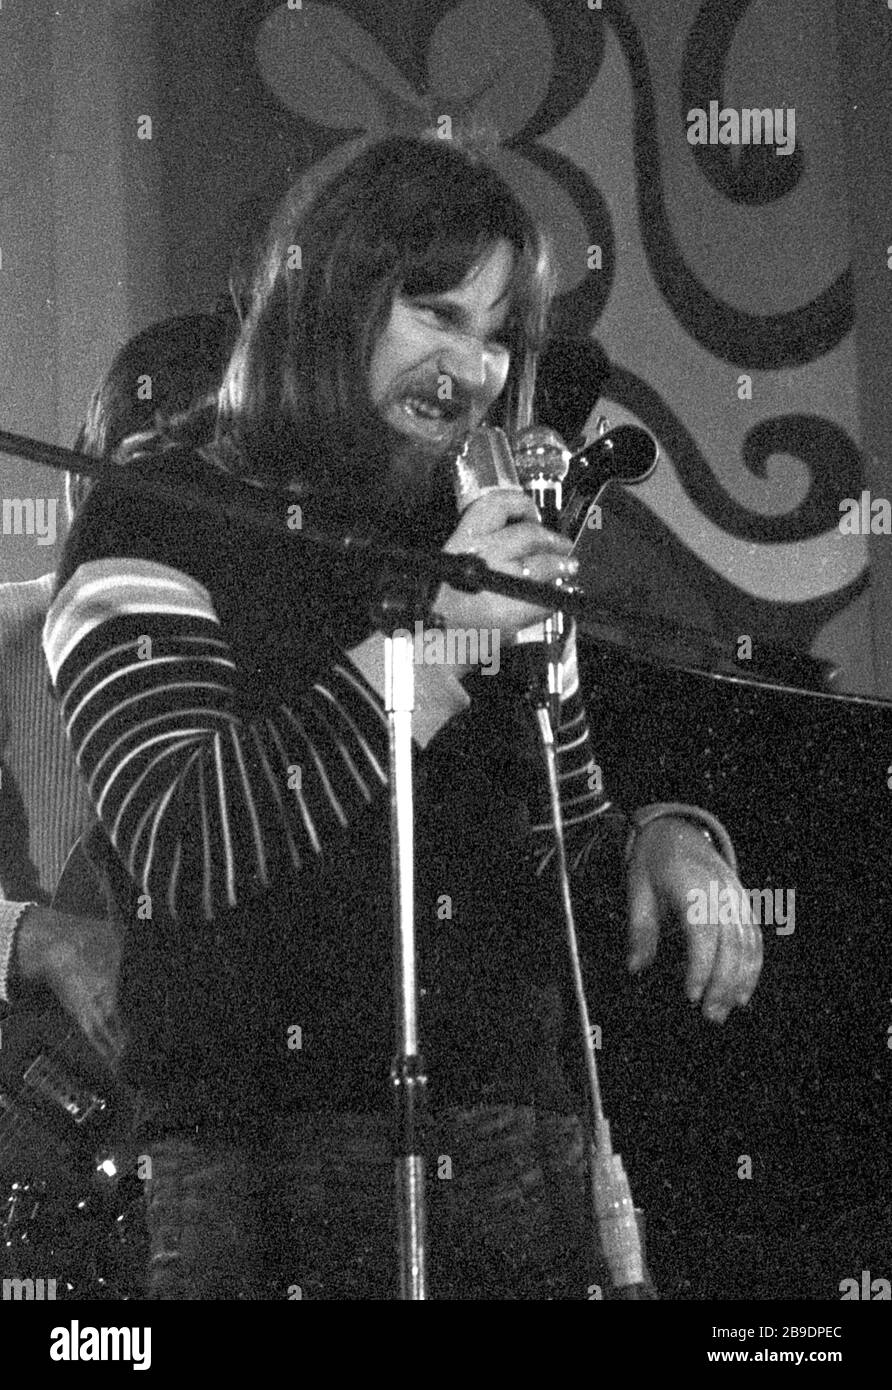 Herbert Dreilich with the All Star Band Berlin during a performance at the Klubhaus der Gewerkschaften in Halle an der Saale in January 1973, making a grimace while singing. [automated translation] Stock Photo